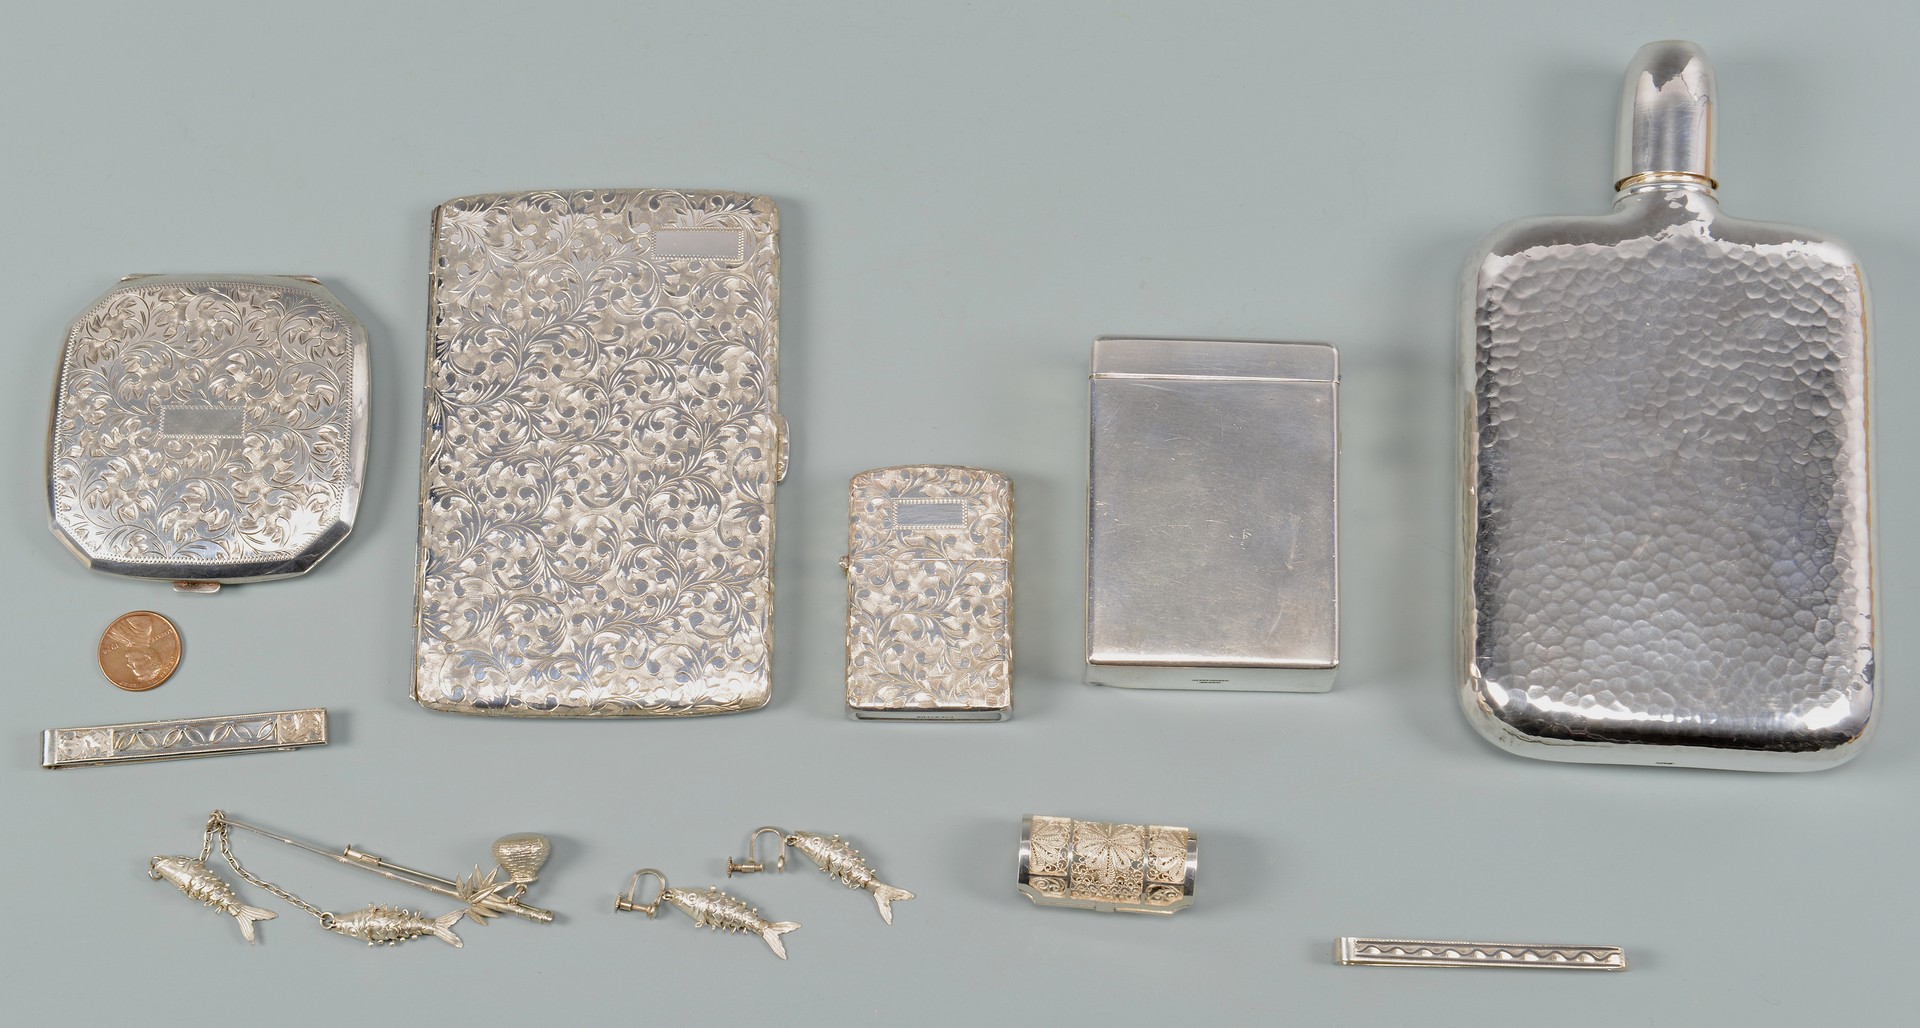 Lot 41: Asian .950 Silver Flask, Smoking and Accessory ite